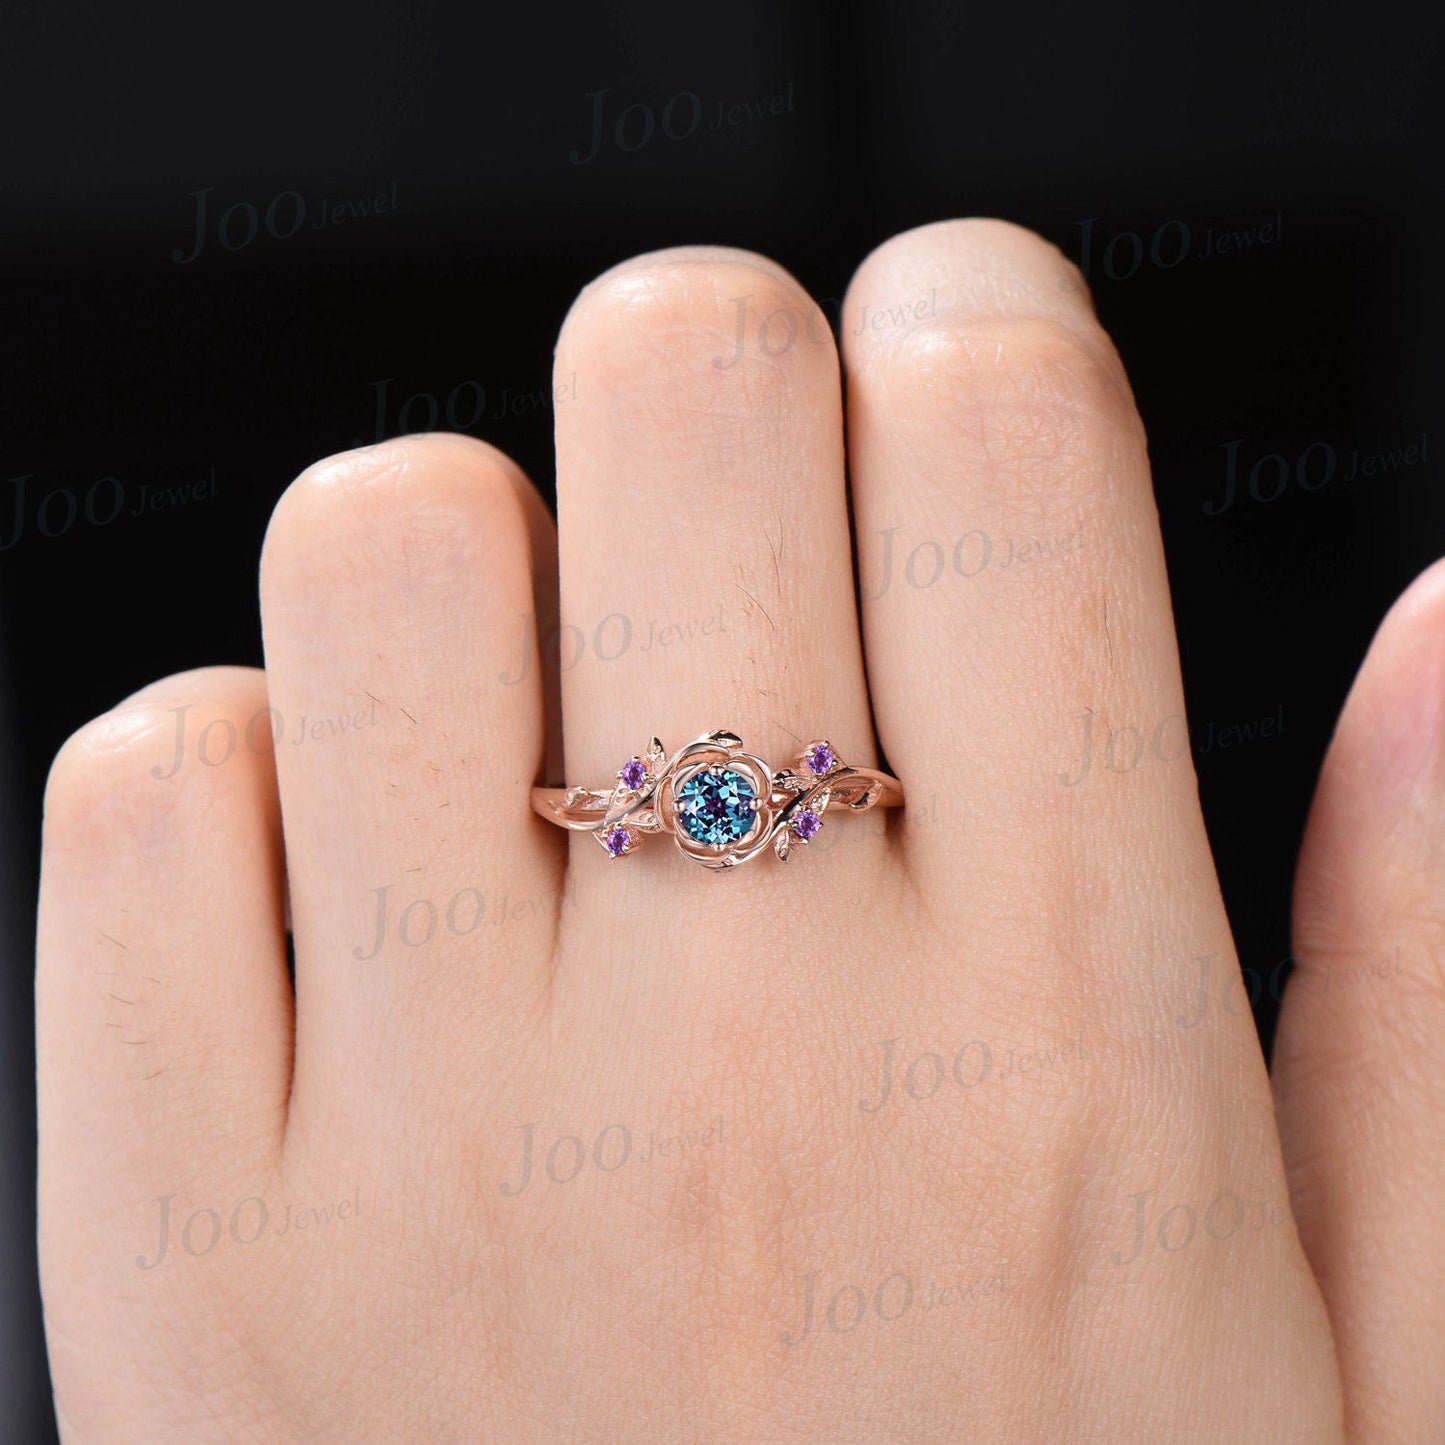 Rose Flower Alexandrite Engagement Rings 5mm Round Color-Change Alexandrite Amethyst Wedding Ring Nature Inspired Leaf Floral Promise Ring